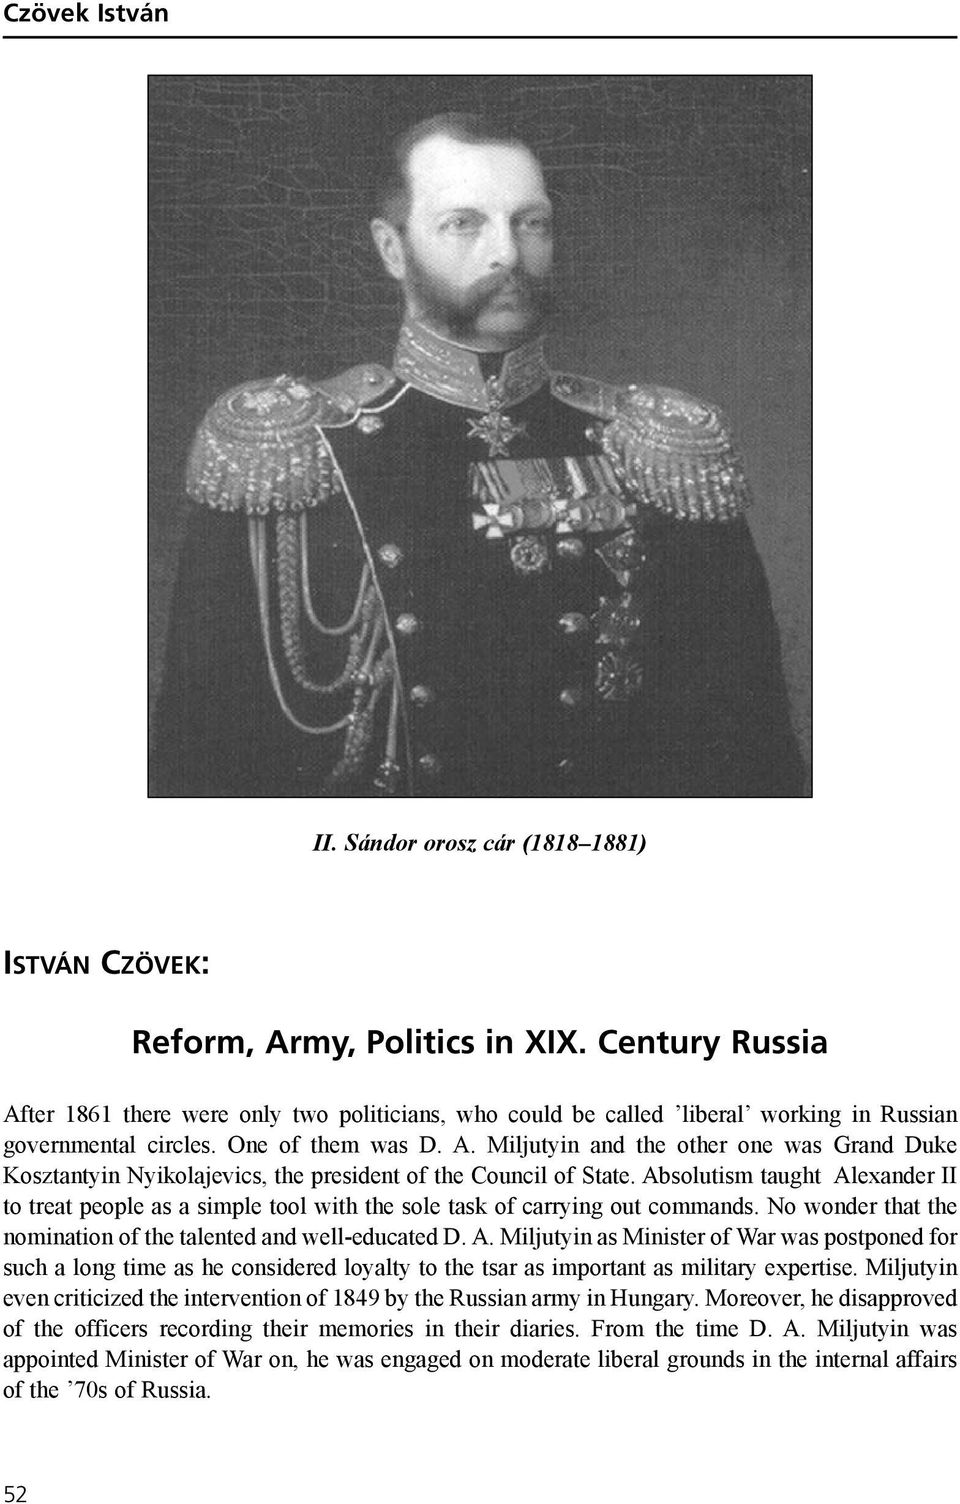 Absolutism taught Alexander II to treat people as a simple tool with the sole task of carrying out commands. No wonder that the nomination of the talented and well-educated D. A. Miljutyin as Minister of War was postponed for such a long time as he considered loyalty to the tsar as important as military expertise.